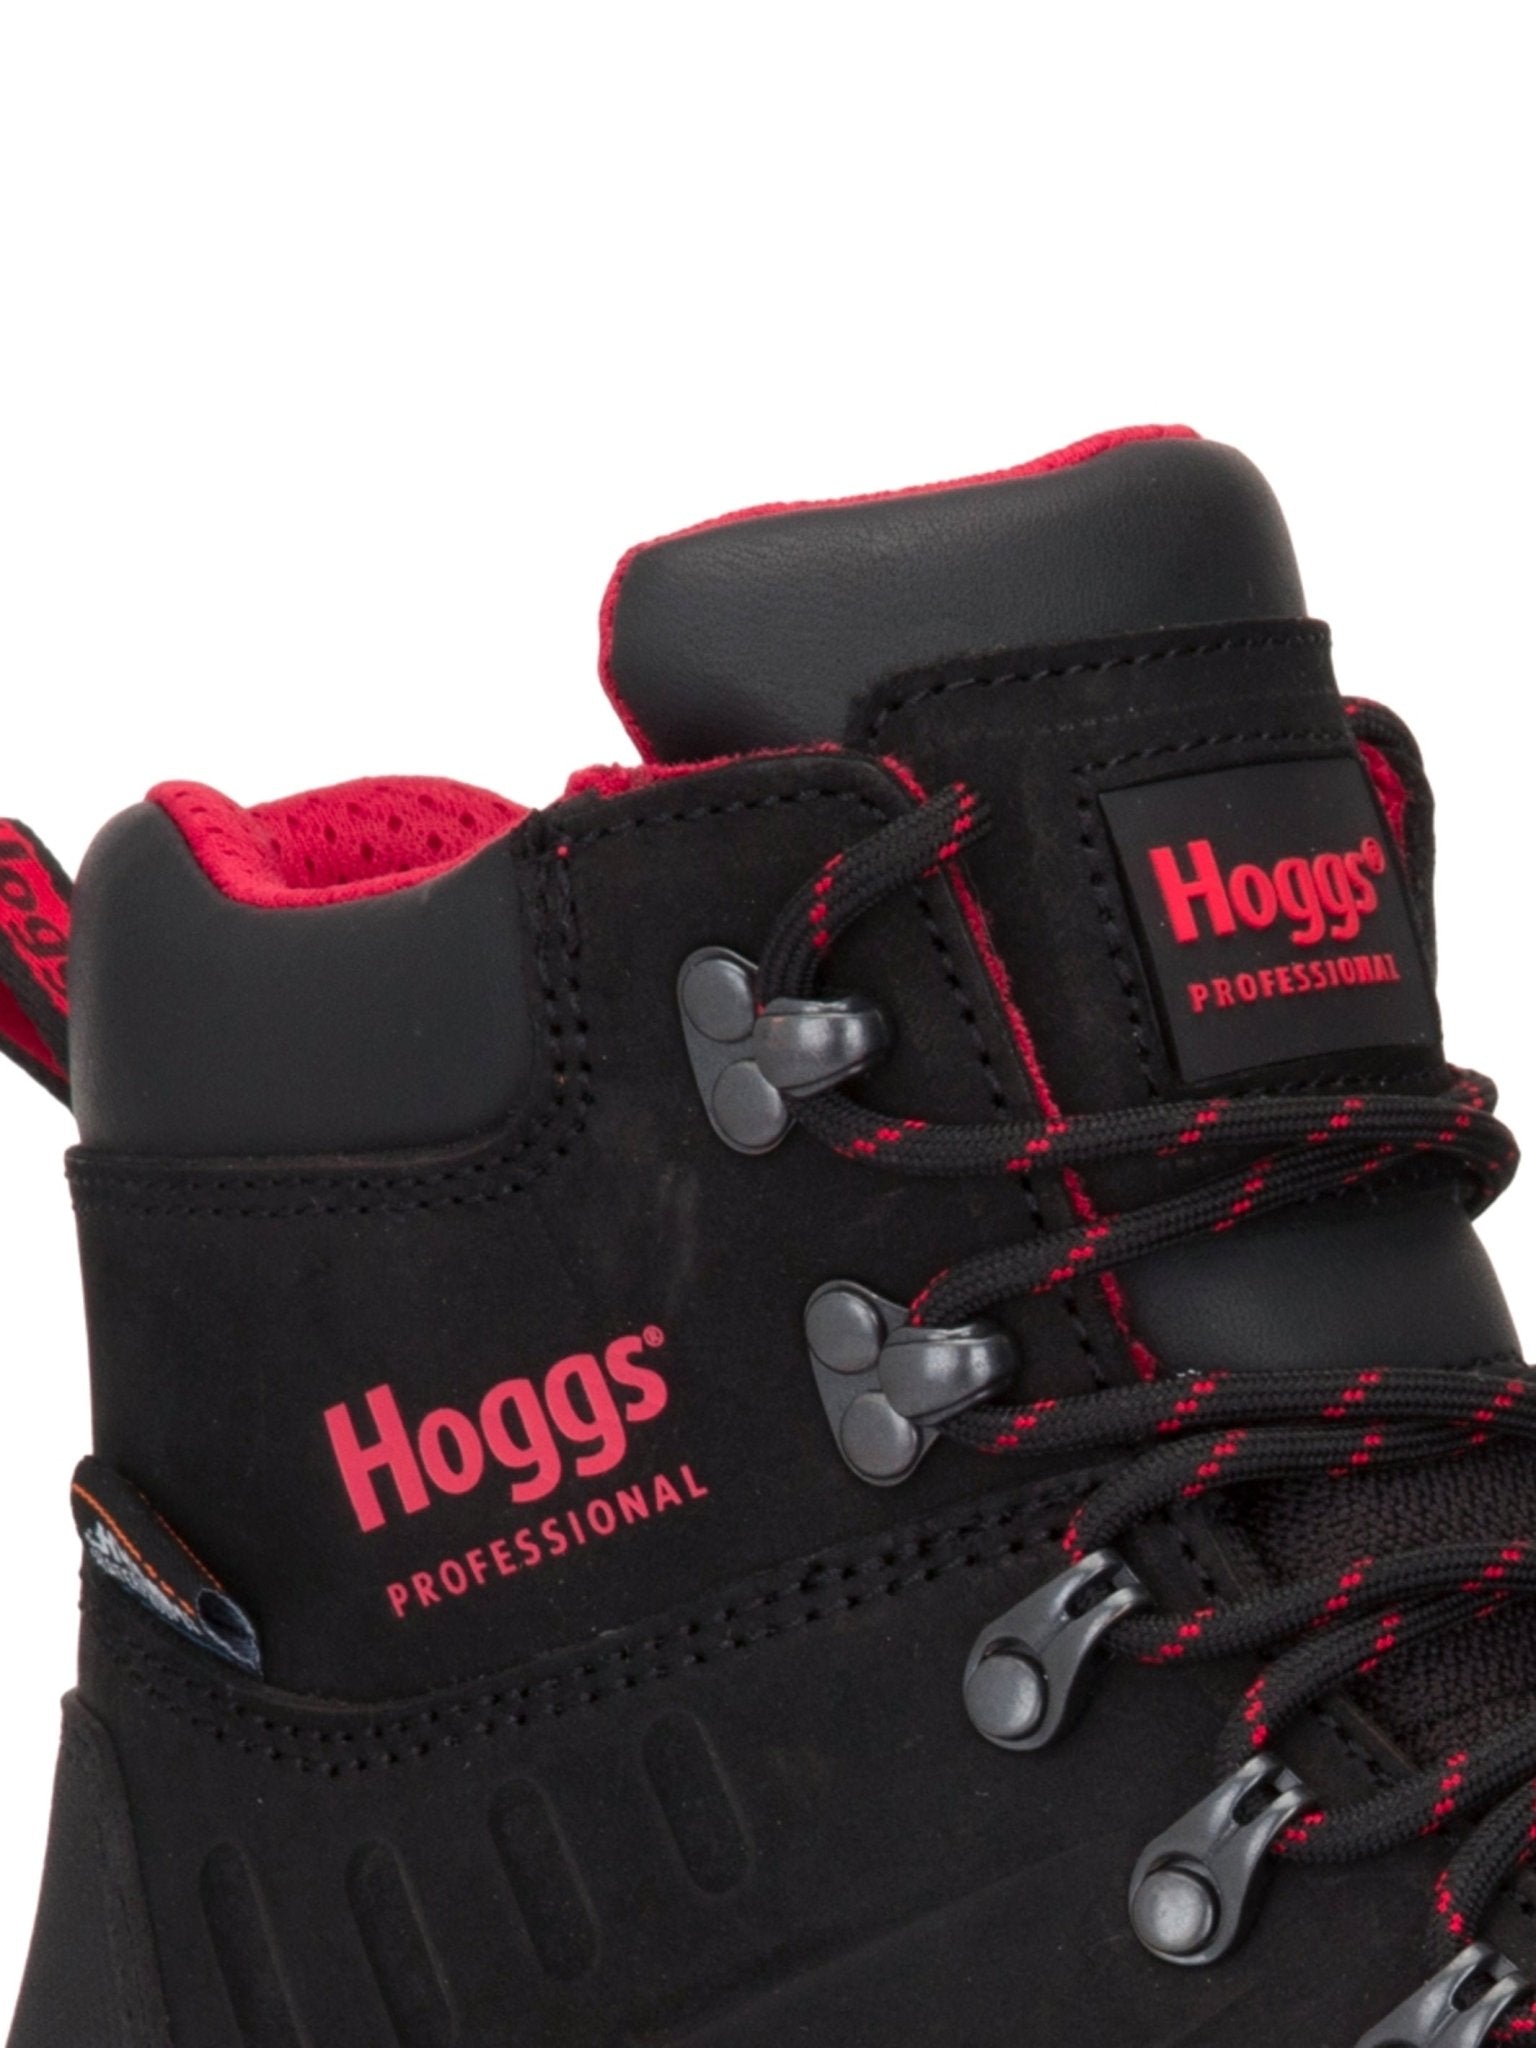 Hoggs of Fife Hoggs of Fife - Poseidon S3 Safety Lace - Up Boot, Waterproof & Breathable Safety Toe cap Lace up Boots Safety Footwear